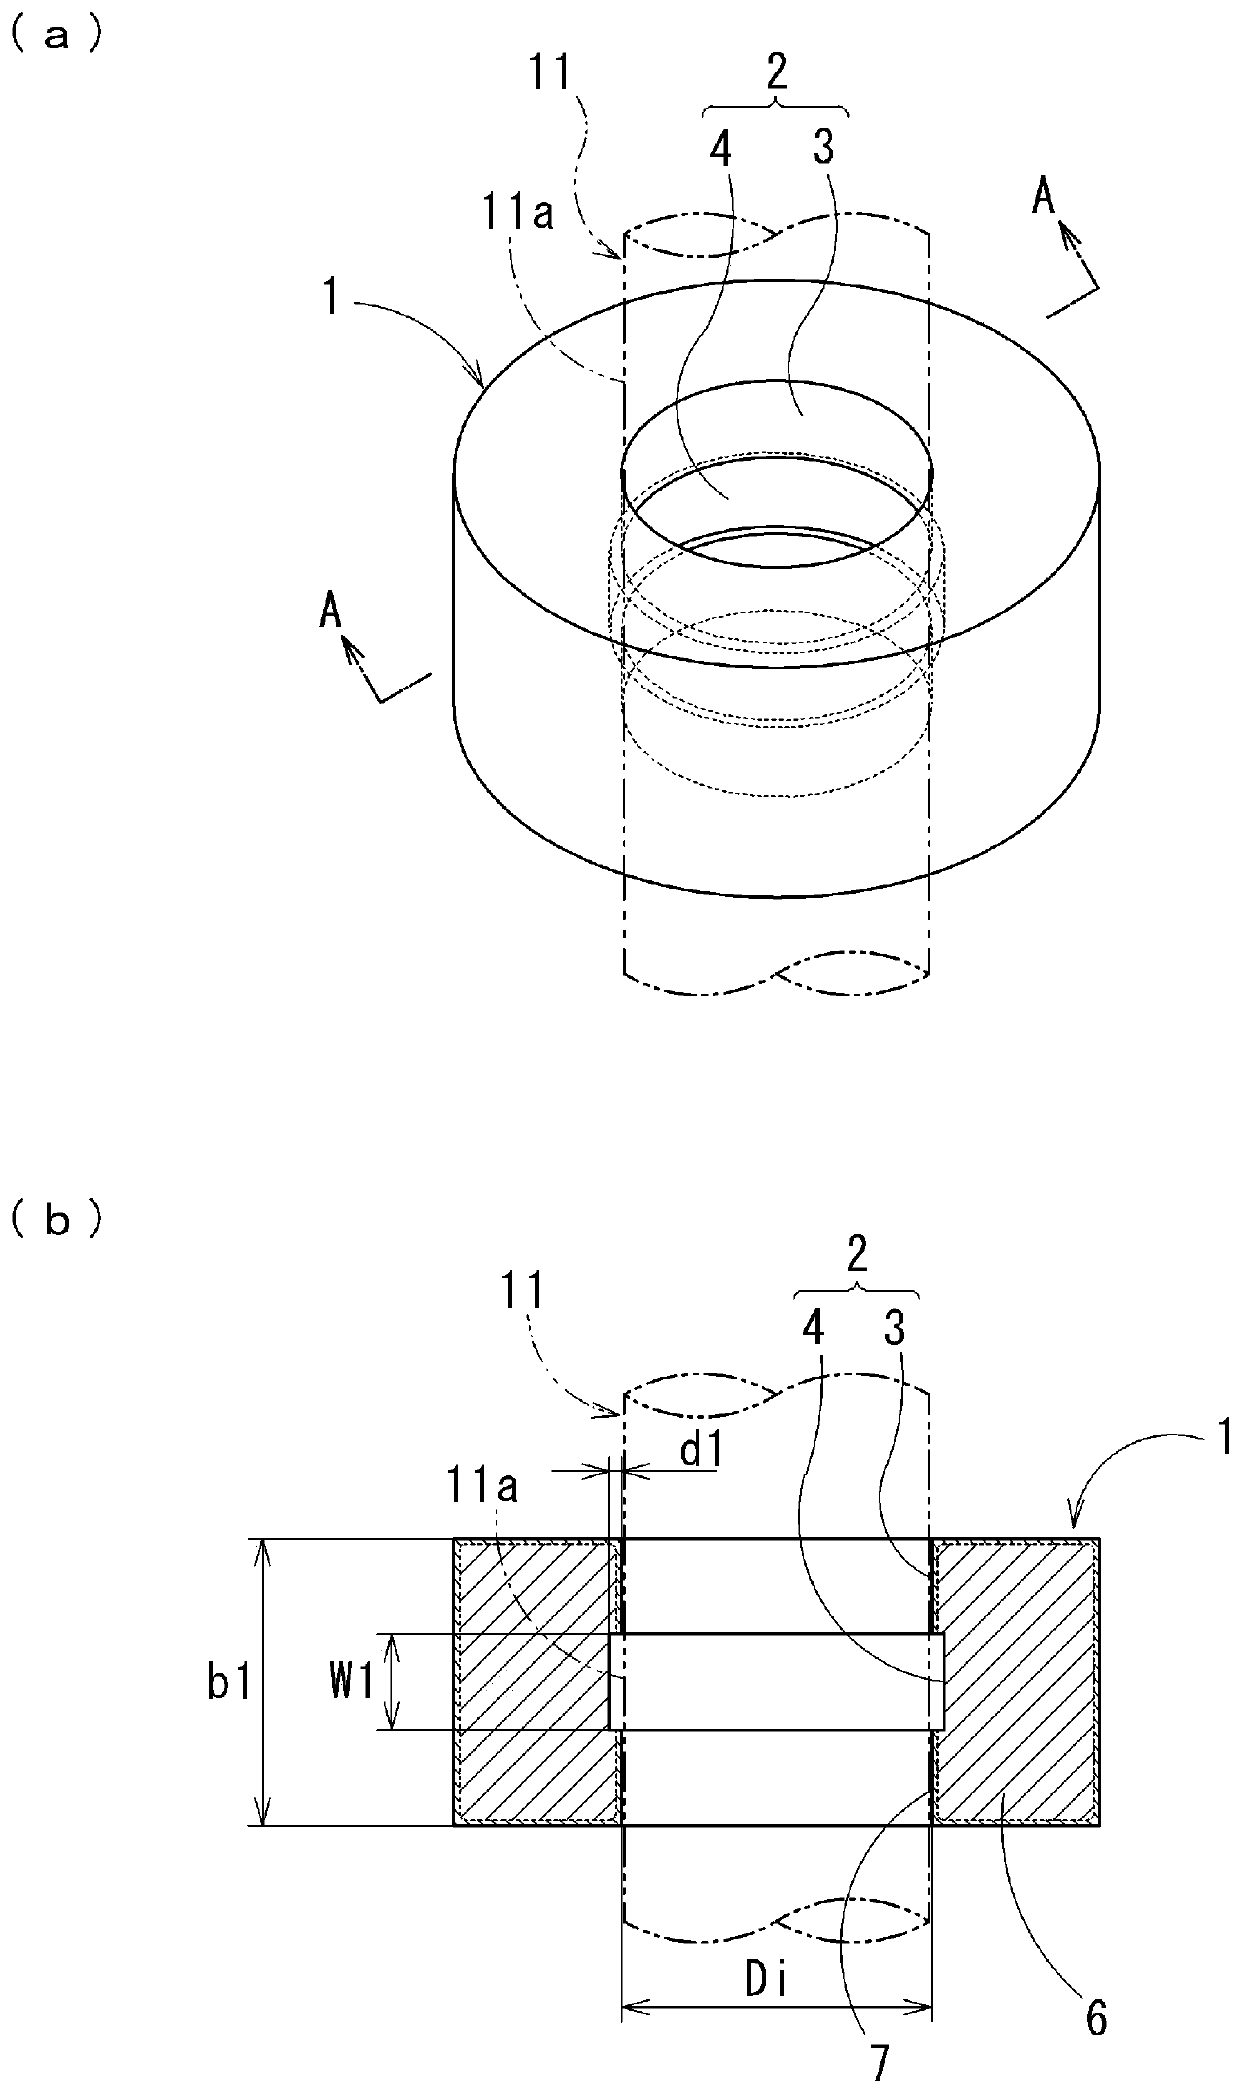 Oil-impregnated sintered bearing and method for manufacturing same